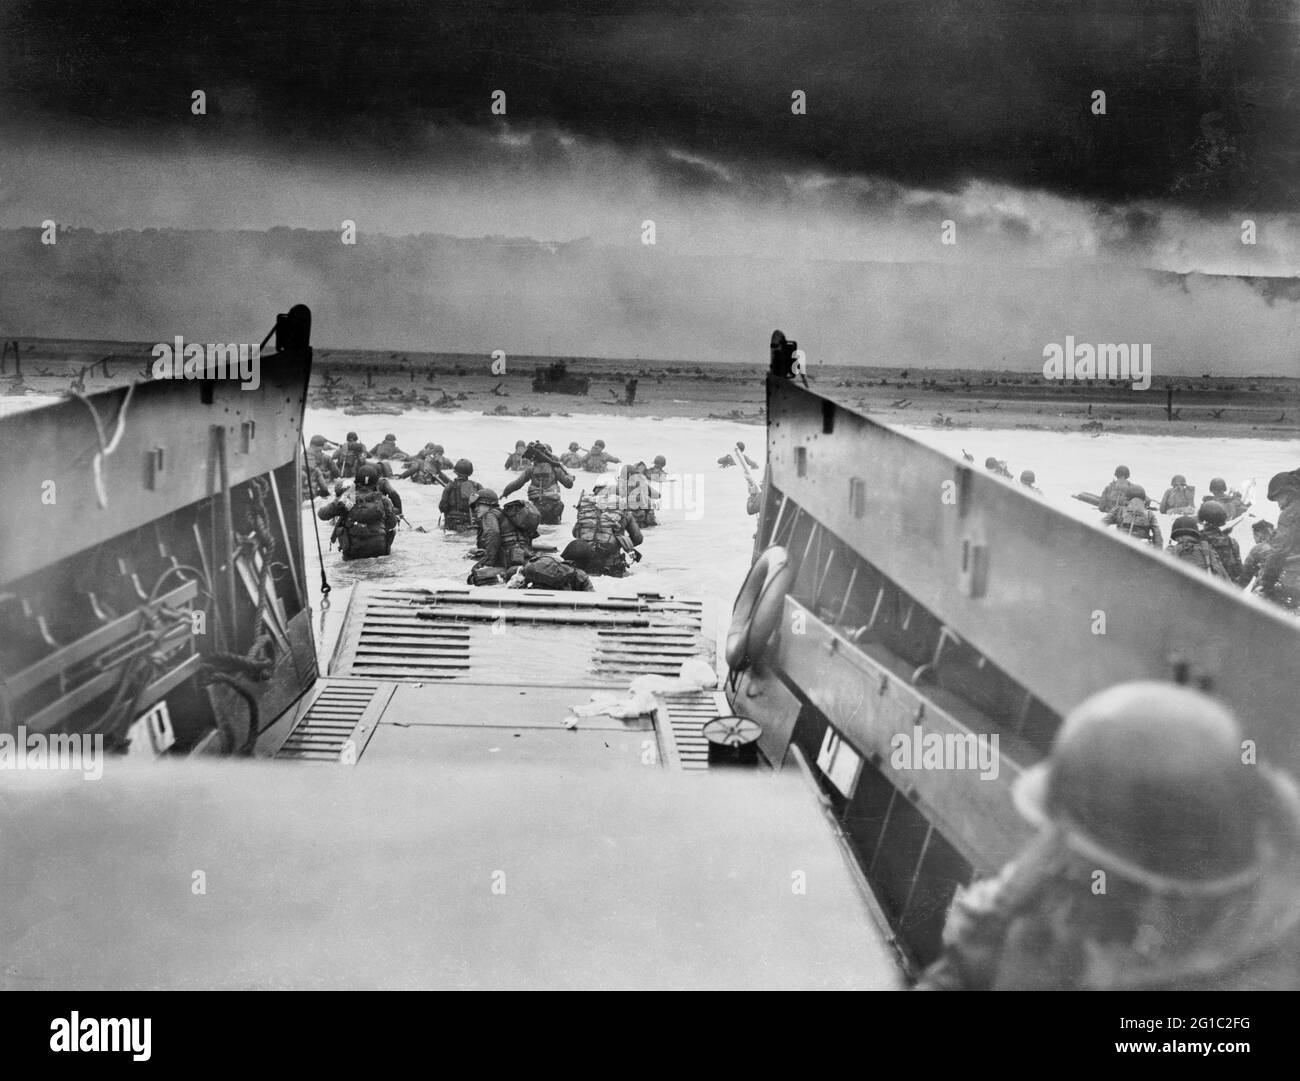 Restored photograph showing American soldiers wading from Coast Guard landing barge toward the beach at Normandy on D-Day, June 6, 1944. Sargent, Robert F., 1923-2012, photographer. Stock Photo